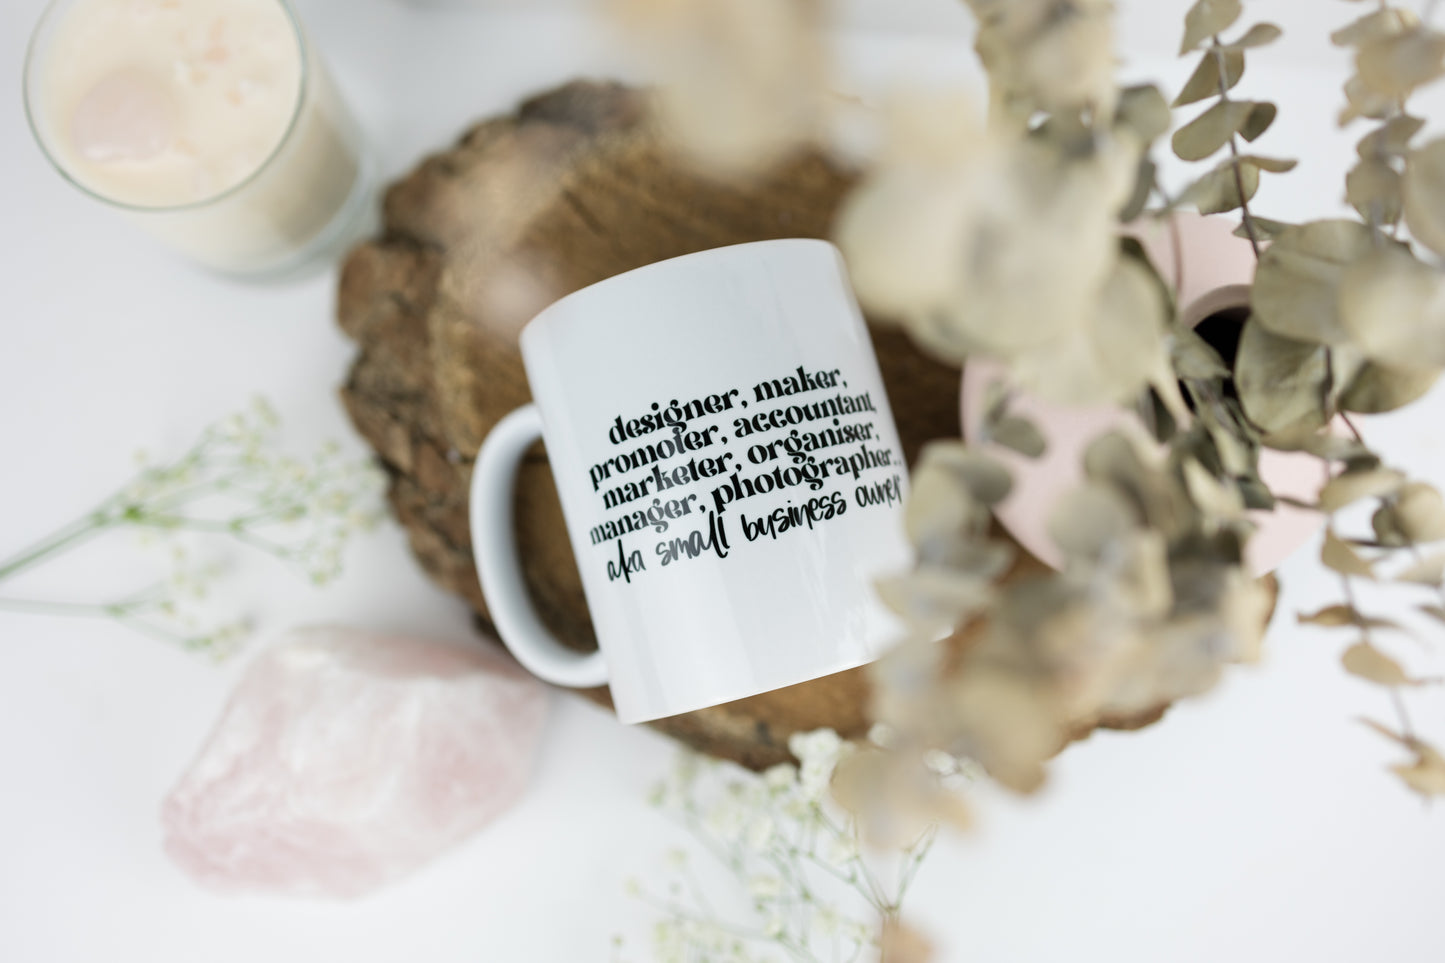 Motivational mug for business owners Small Business Owner Gift, Female Boss Mug 11 oz. Busybee Creates